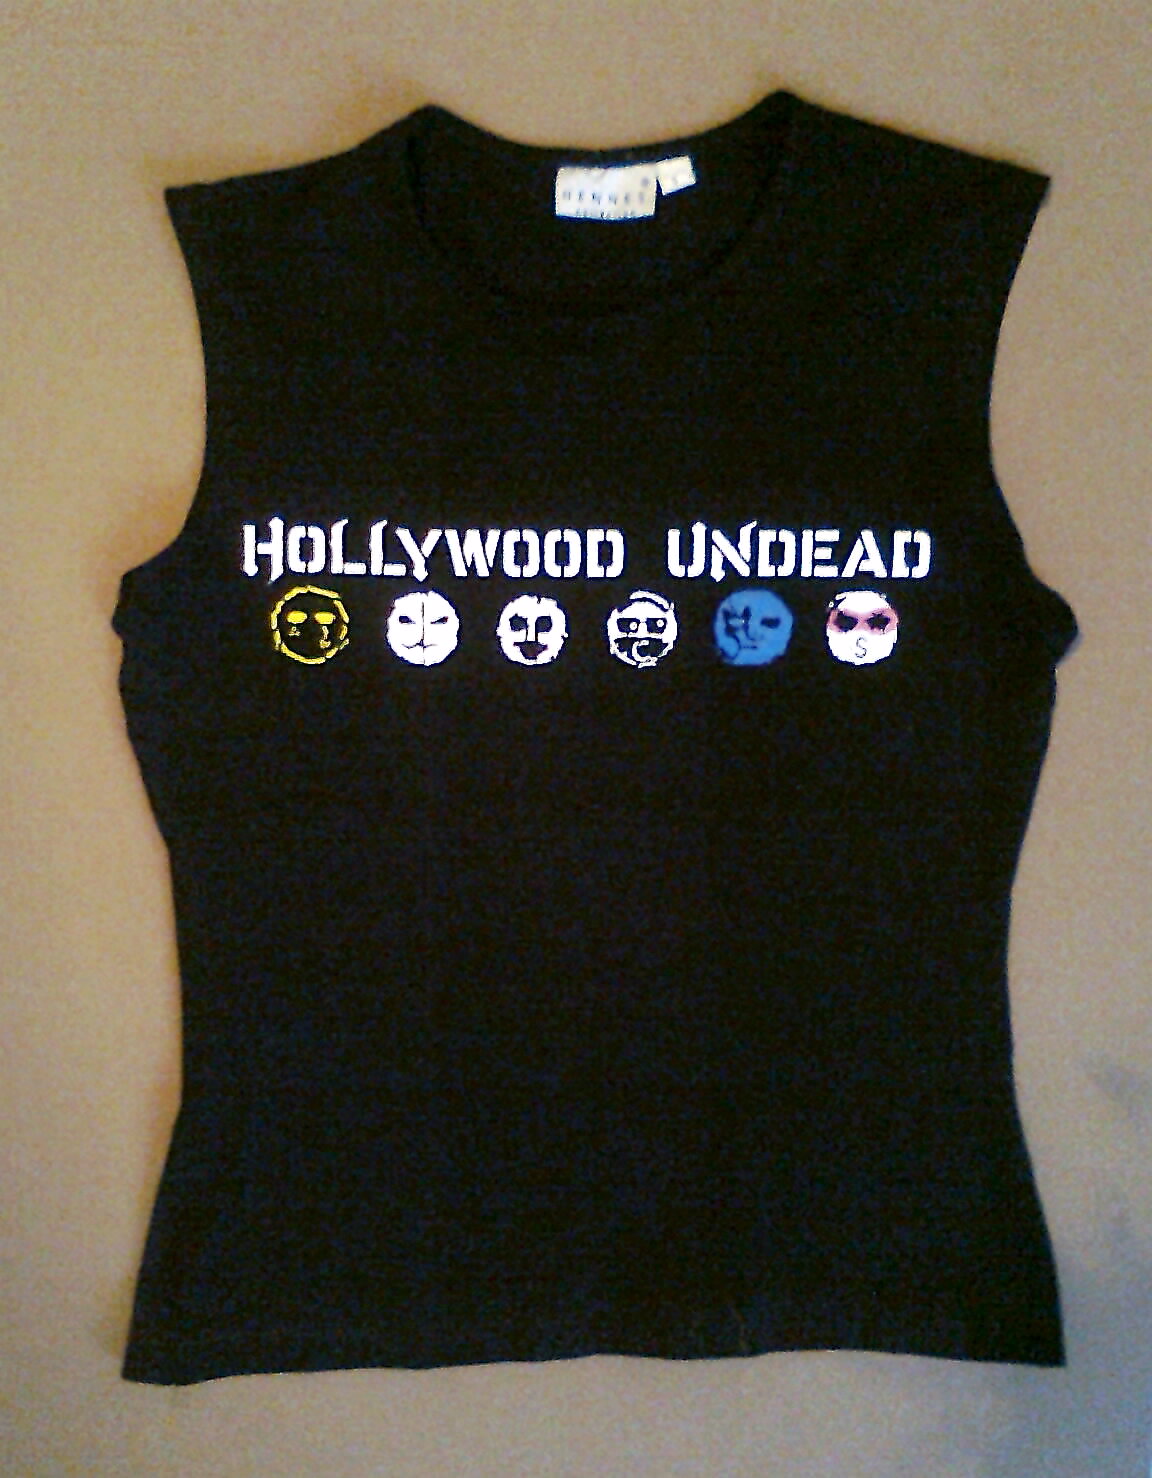 My New T-Shirt_Hollywood Undead (front view) by Trix92